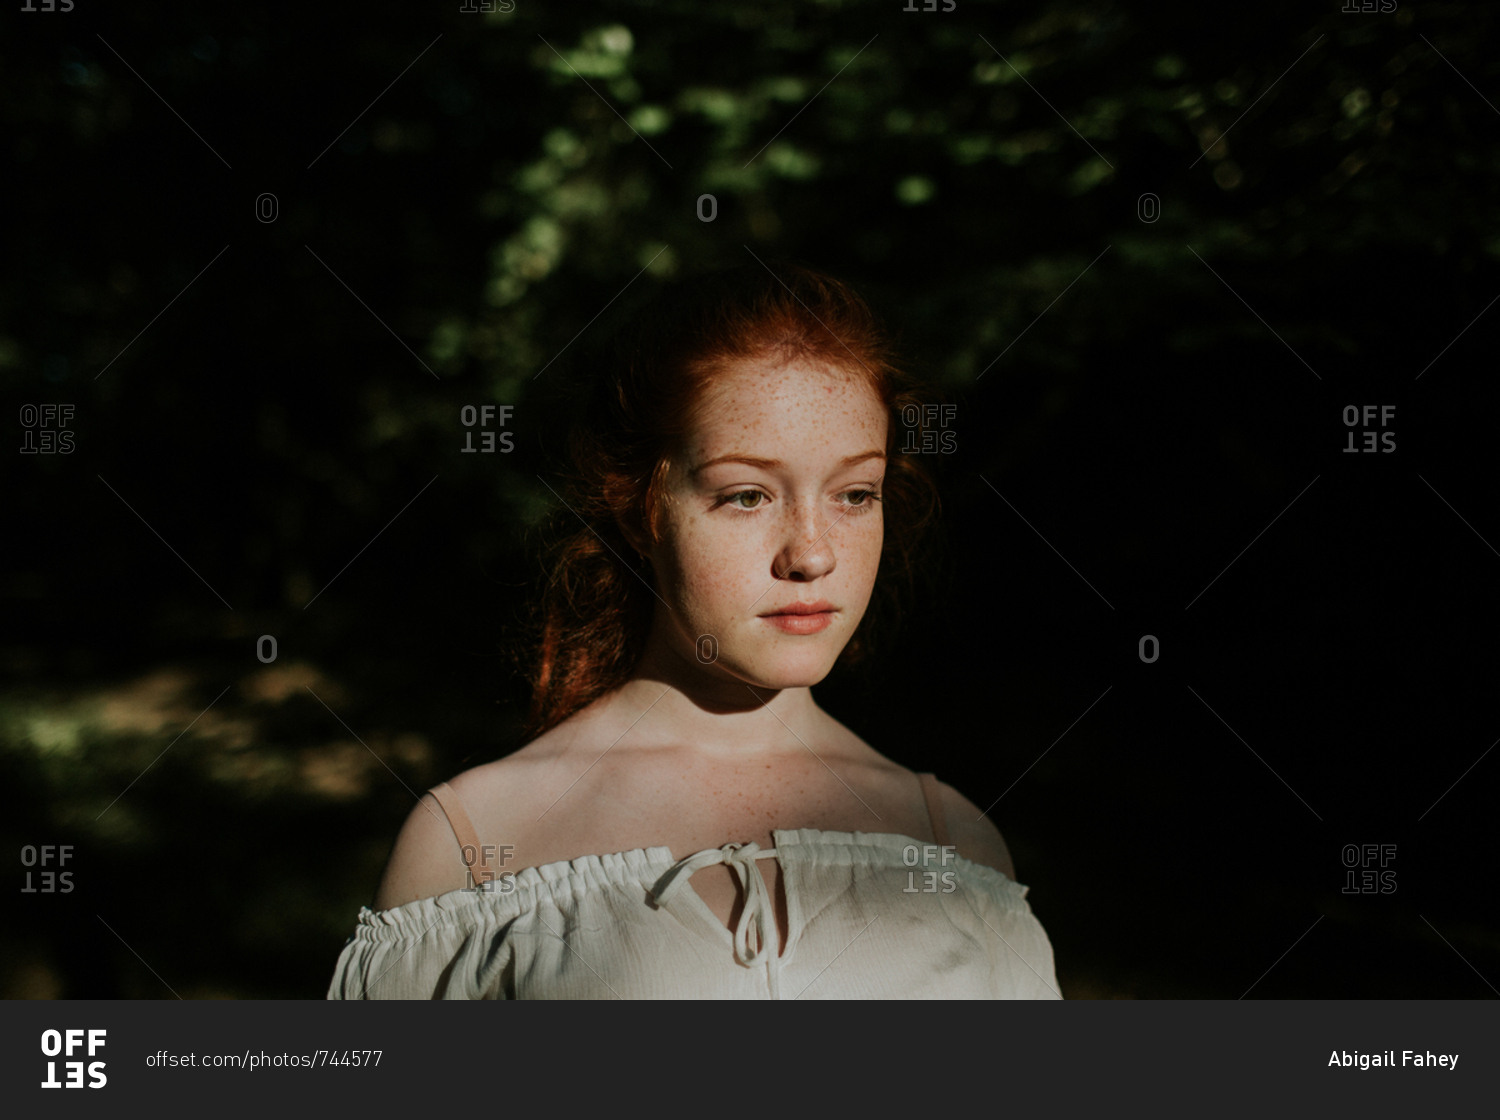 Portrait of a redheaded girl wearing off-shoulder blouse